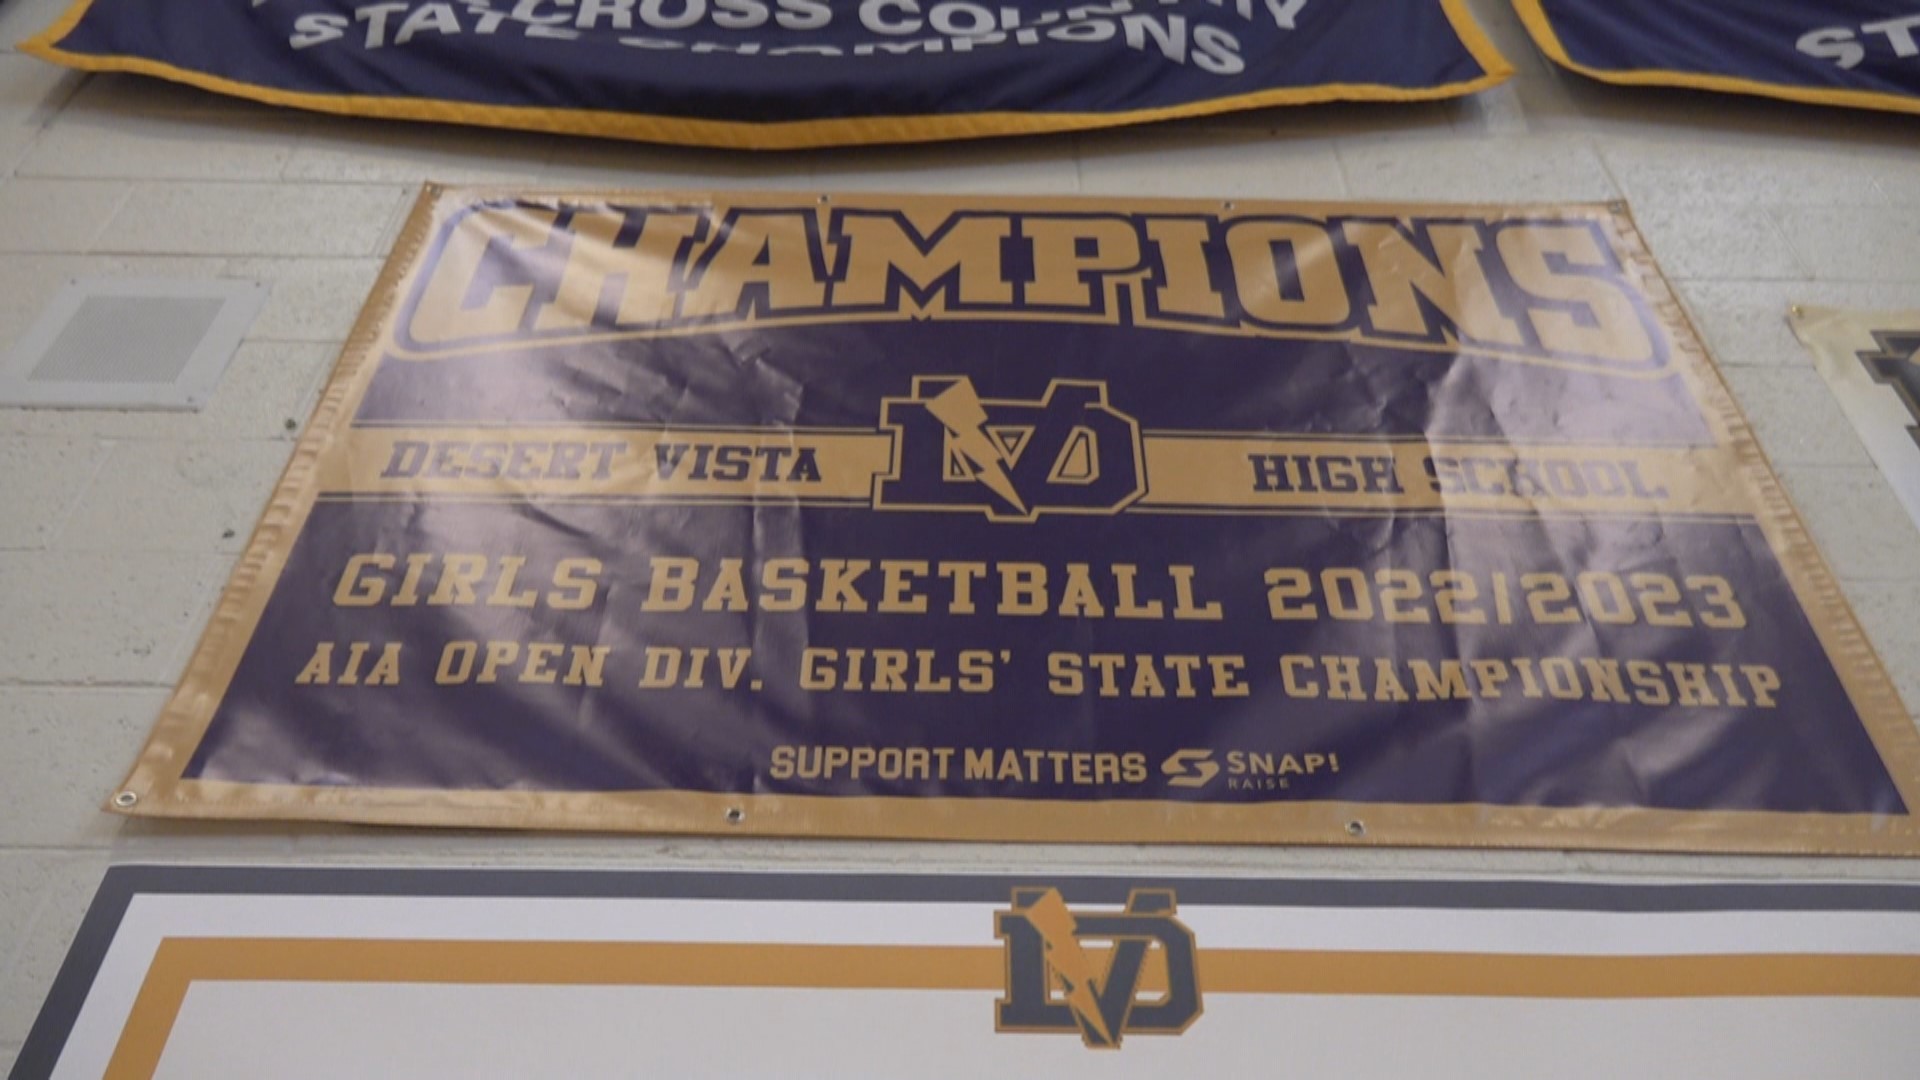 The Desert Vista Thunder girls basketball team has a new coach and new motto as they chase back-to-back state championships. 12News' Lina Washington reports.